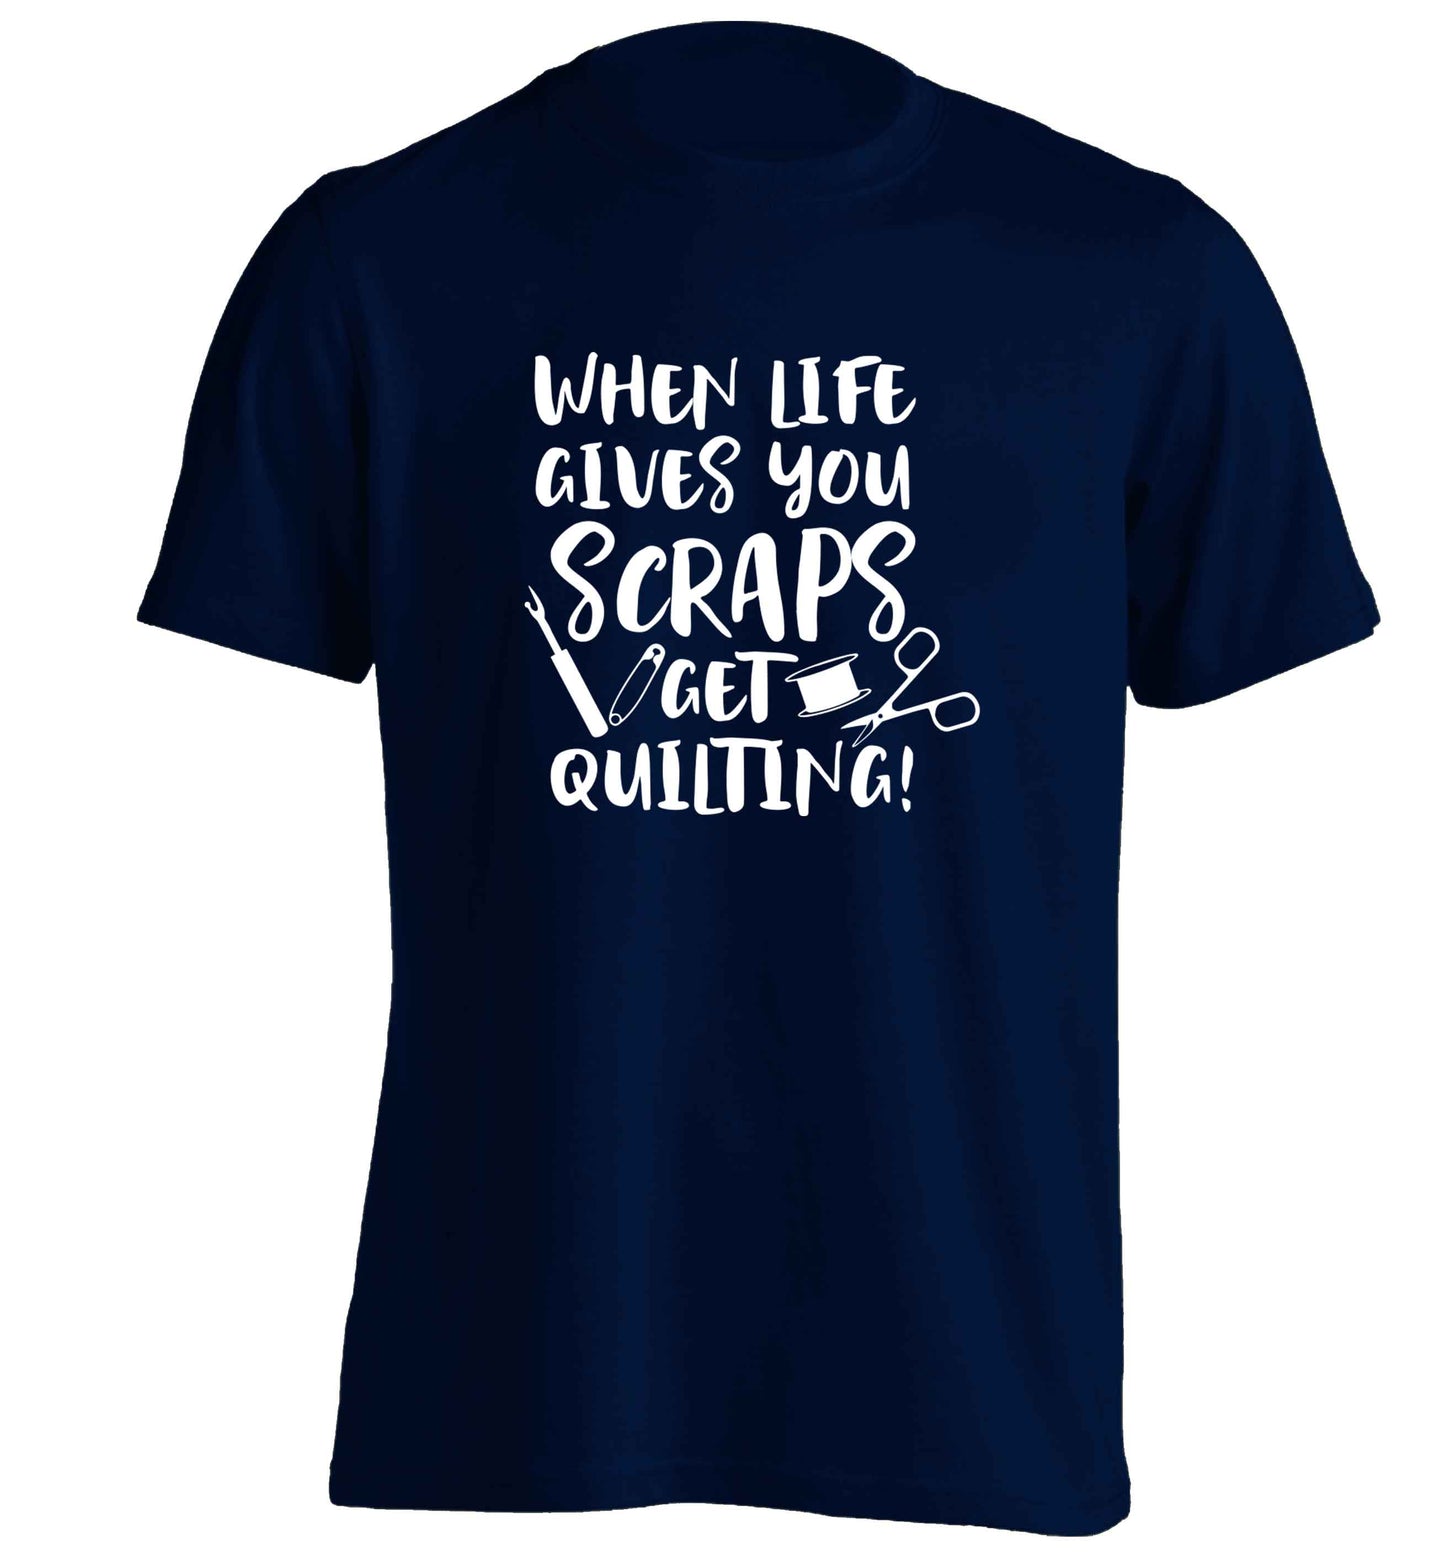 When life gives you scraps get quilting! adults unisex navy Tshirt 2XL